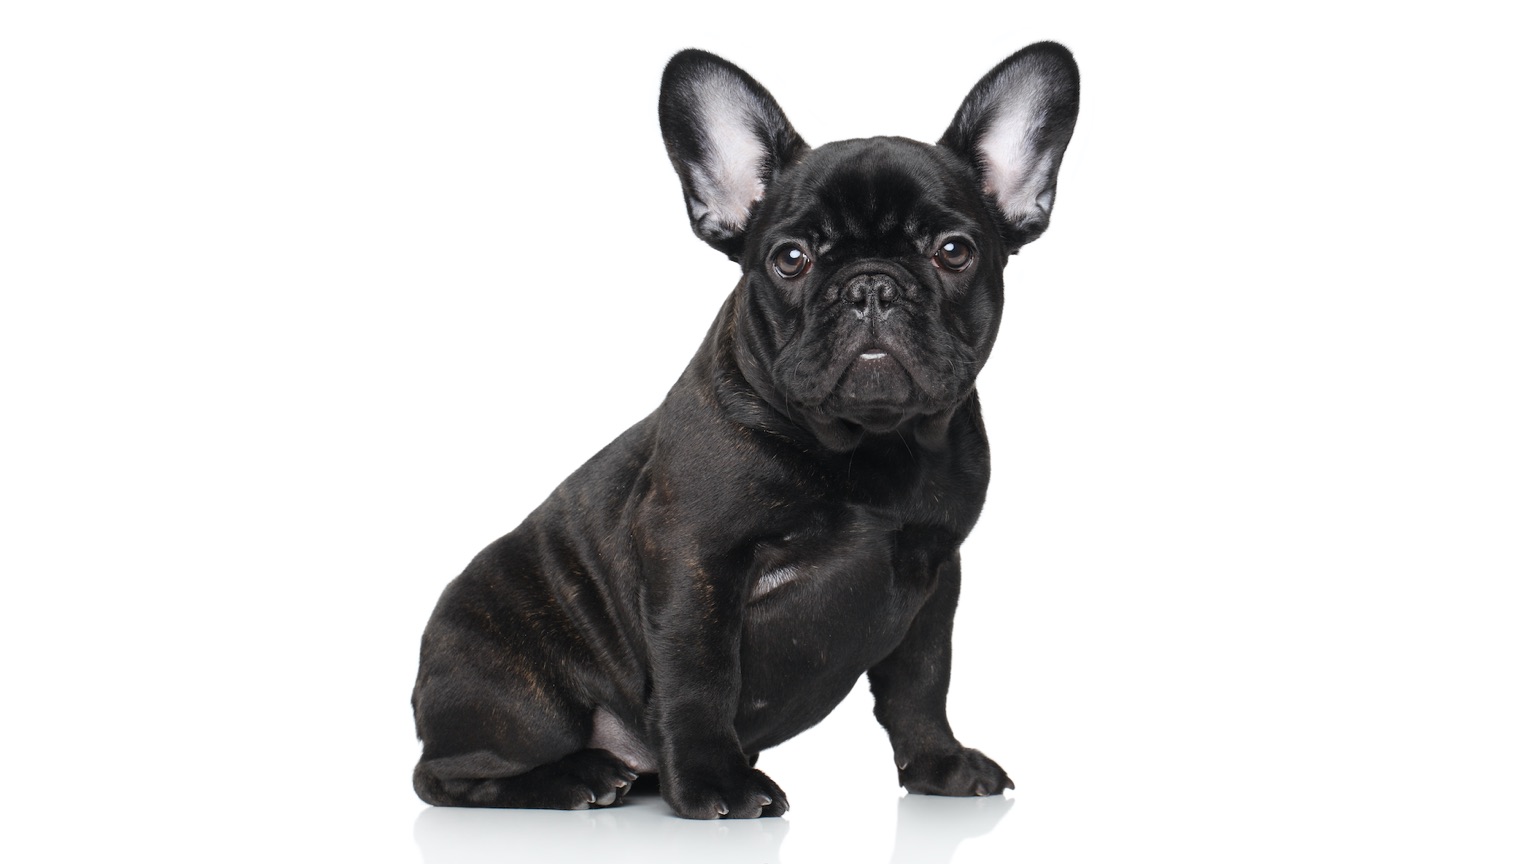 French Bulldog Puppy Doing Dog training in a sit stay